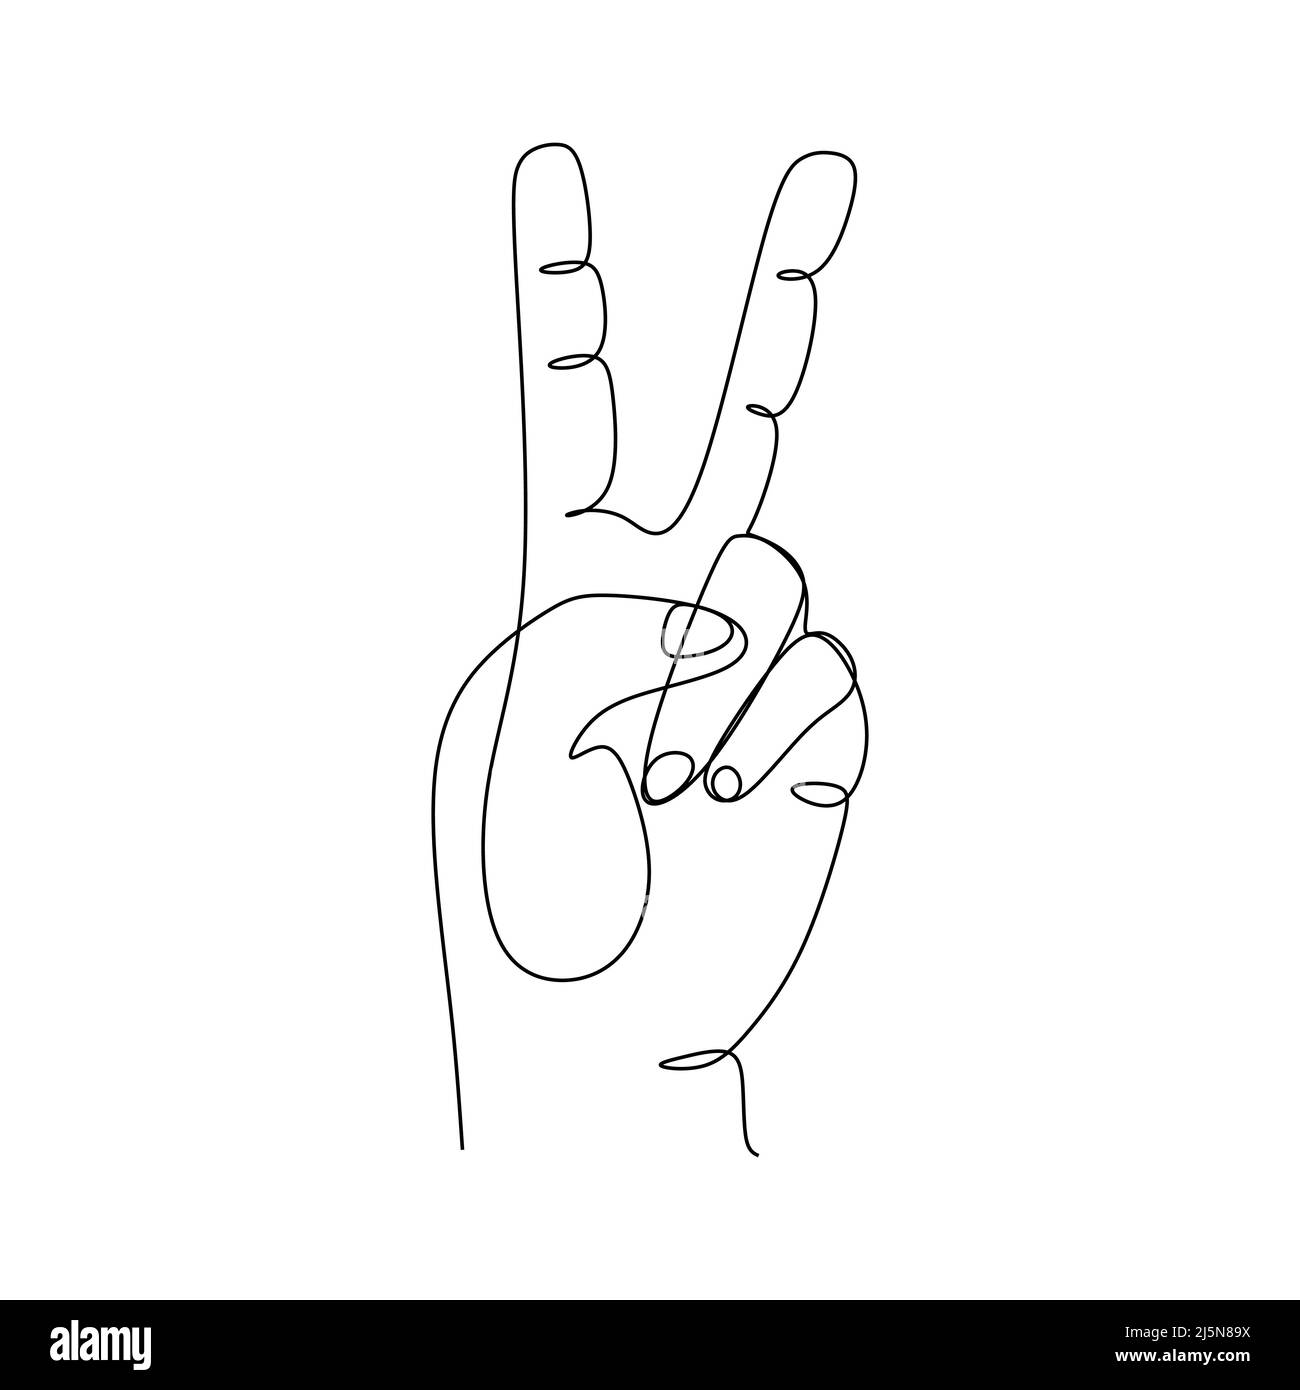 Continuous line draw design vector illustration. v letter Sign and symbol of hand gestures. Single continuous drawing line. Hand drawn style art doodle Stock Vector